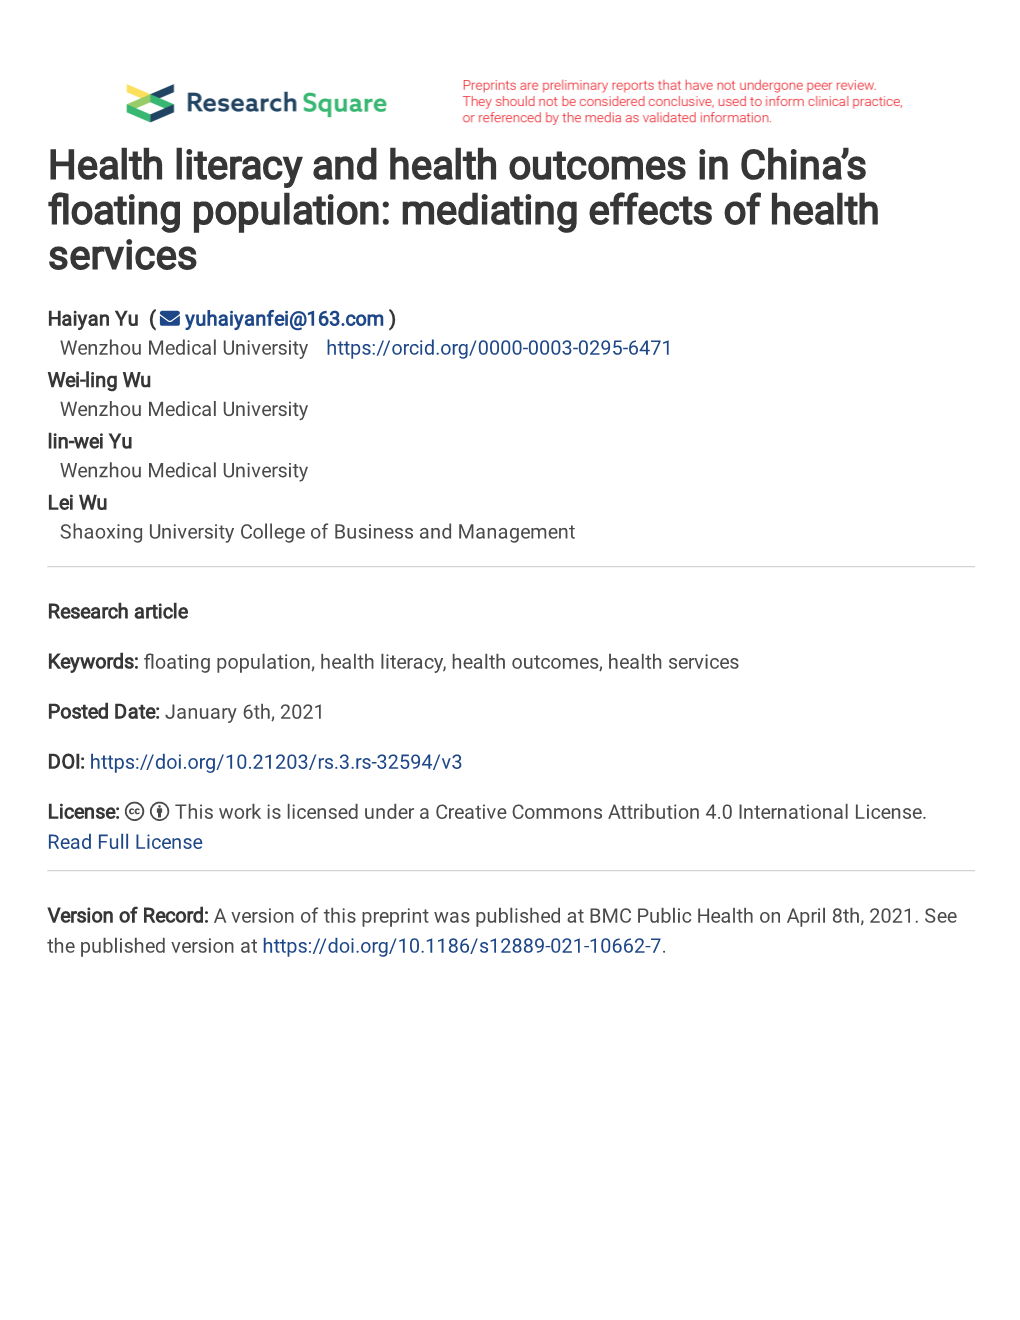 Health Literacy and Health Outcomes in China's Floating